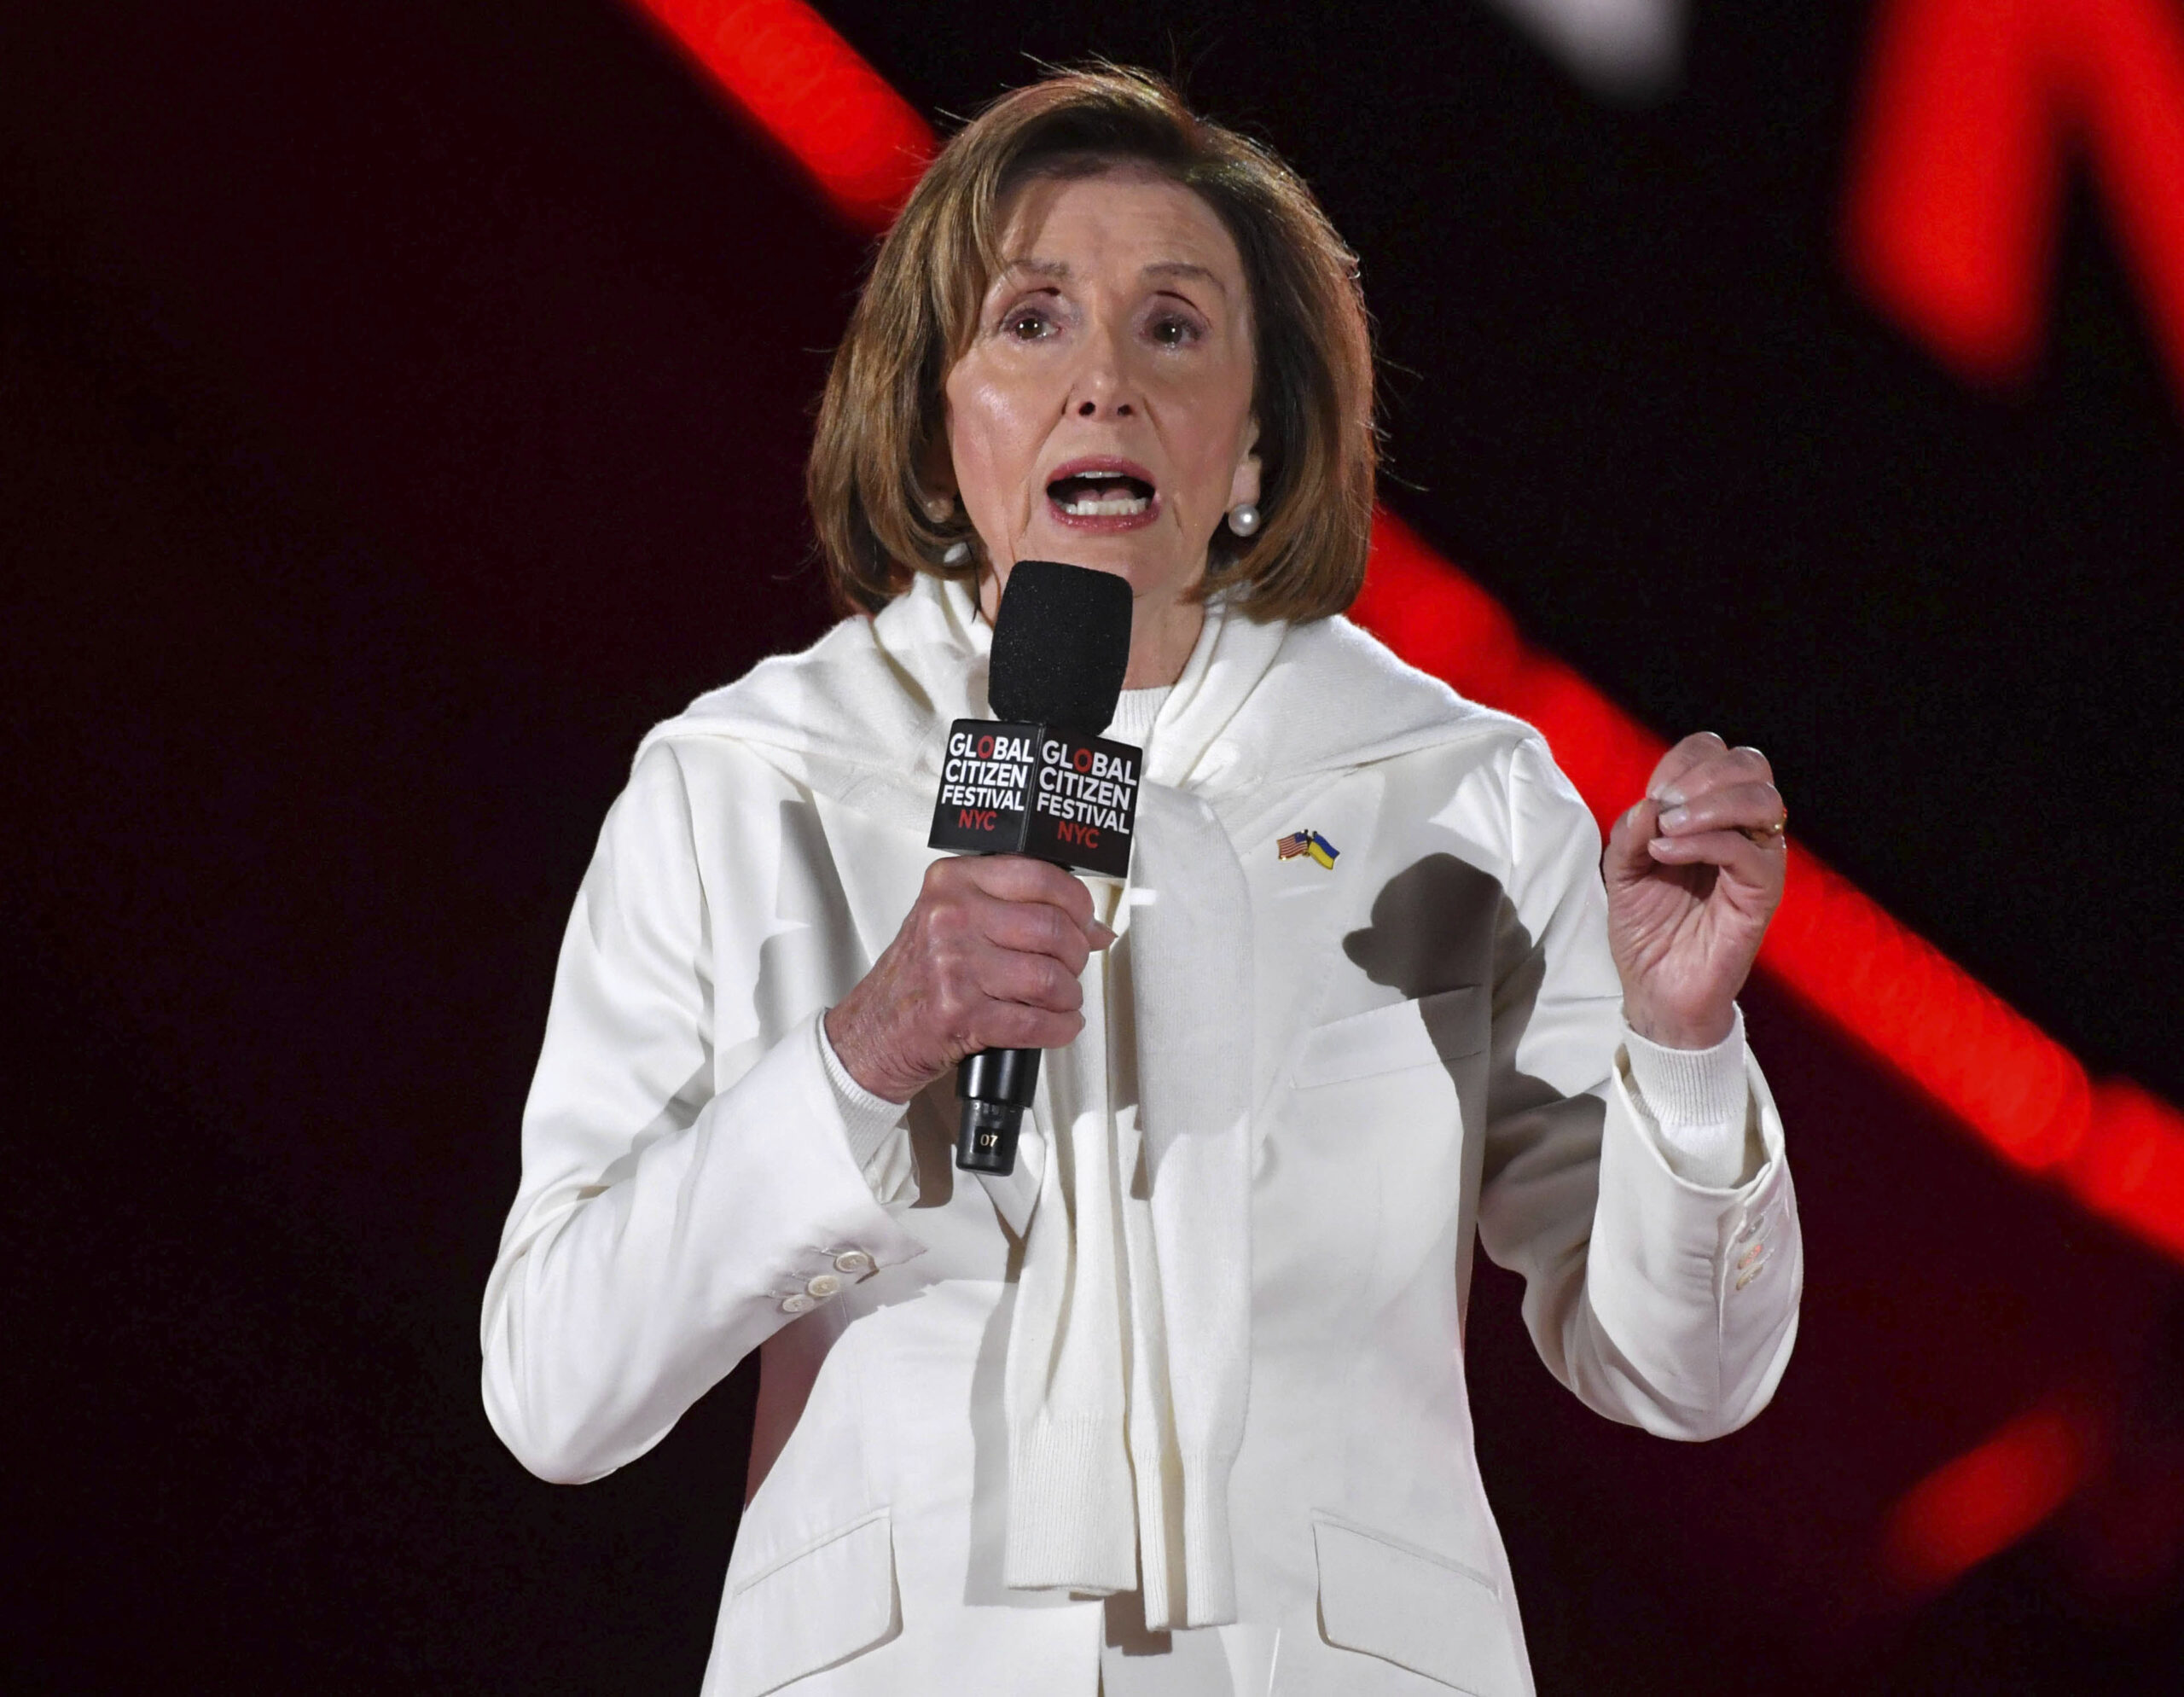 Protestors SCREAM at Nancy Pelosi During Speech: ‘We Demand an End to the Zionist Occupation!’